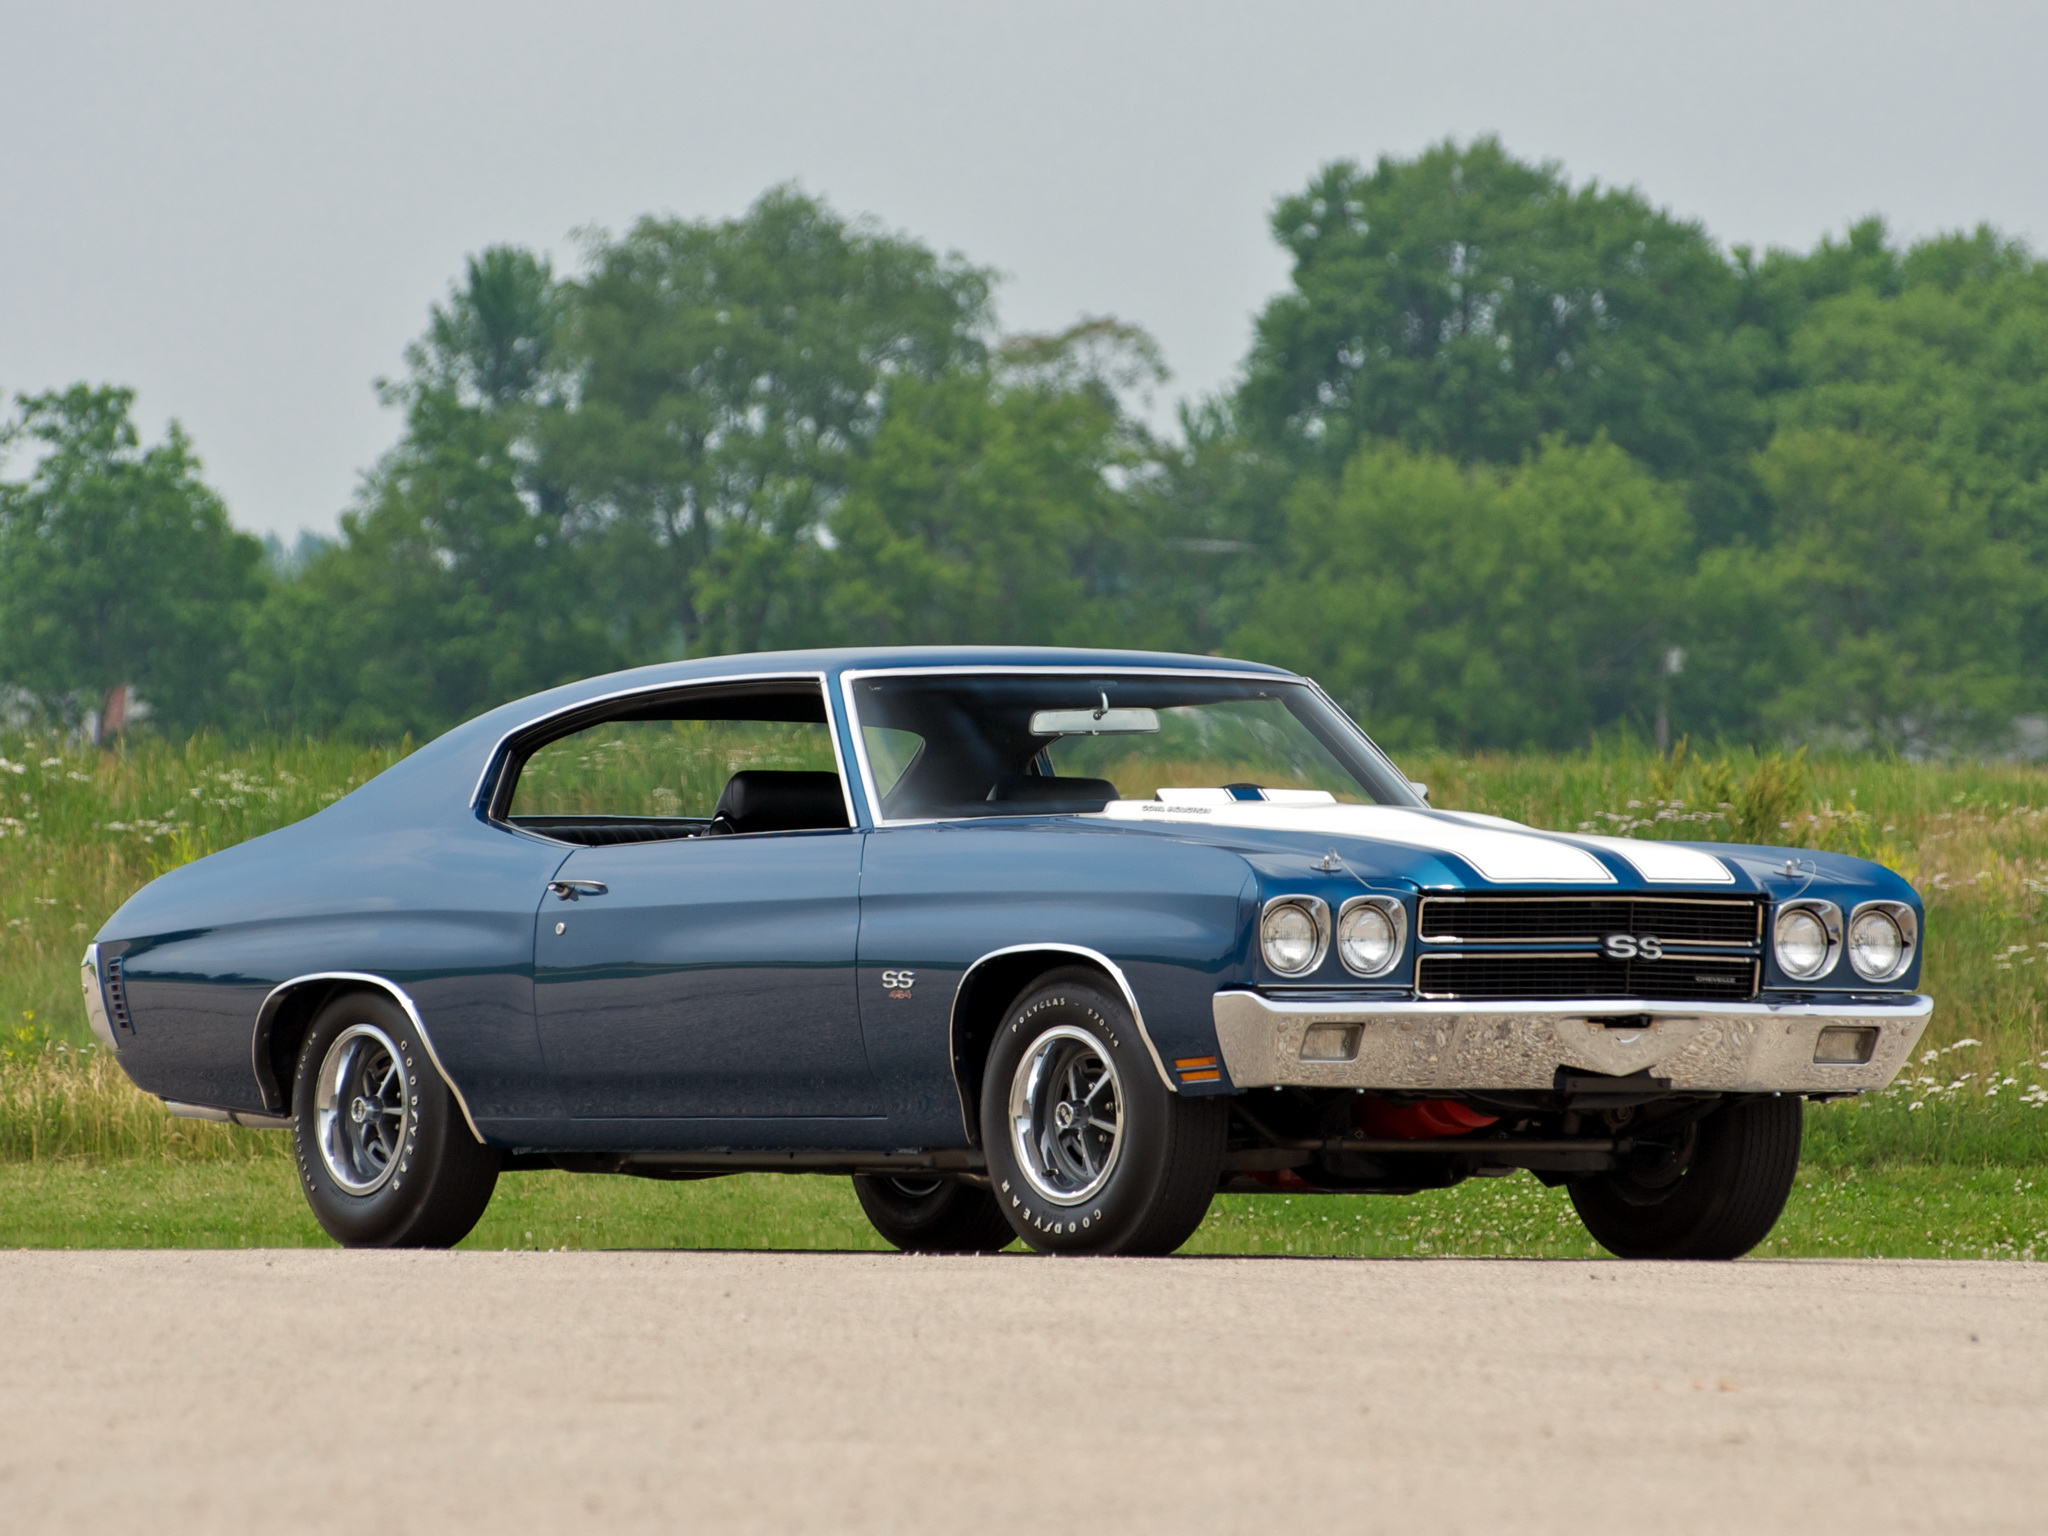 1970 Chevy Chevelle ss Wallpaper images